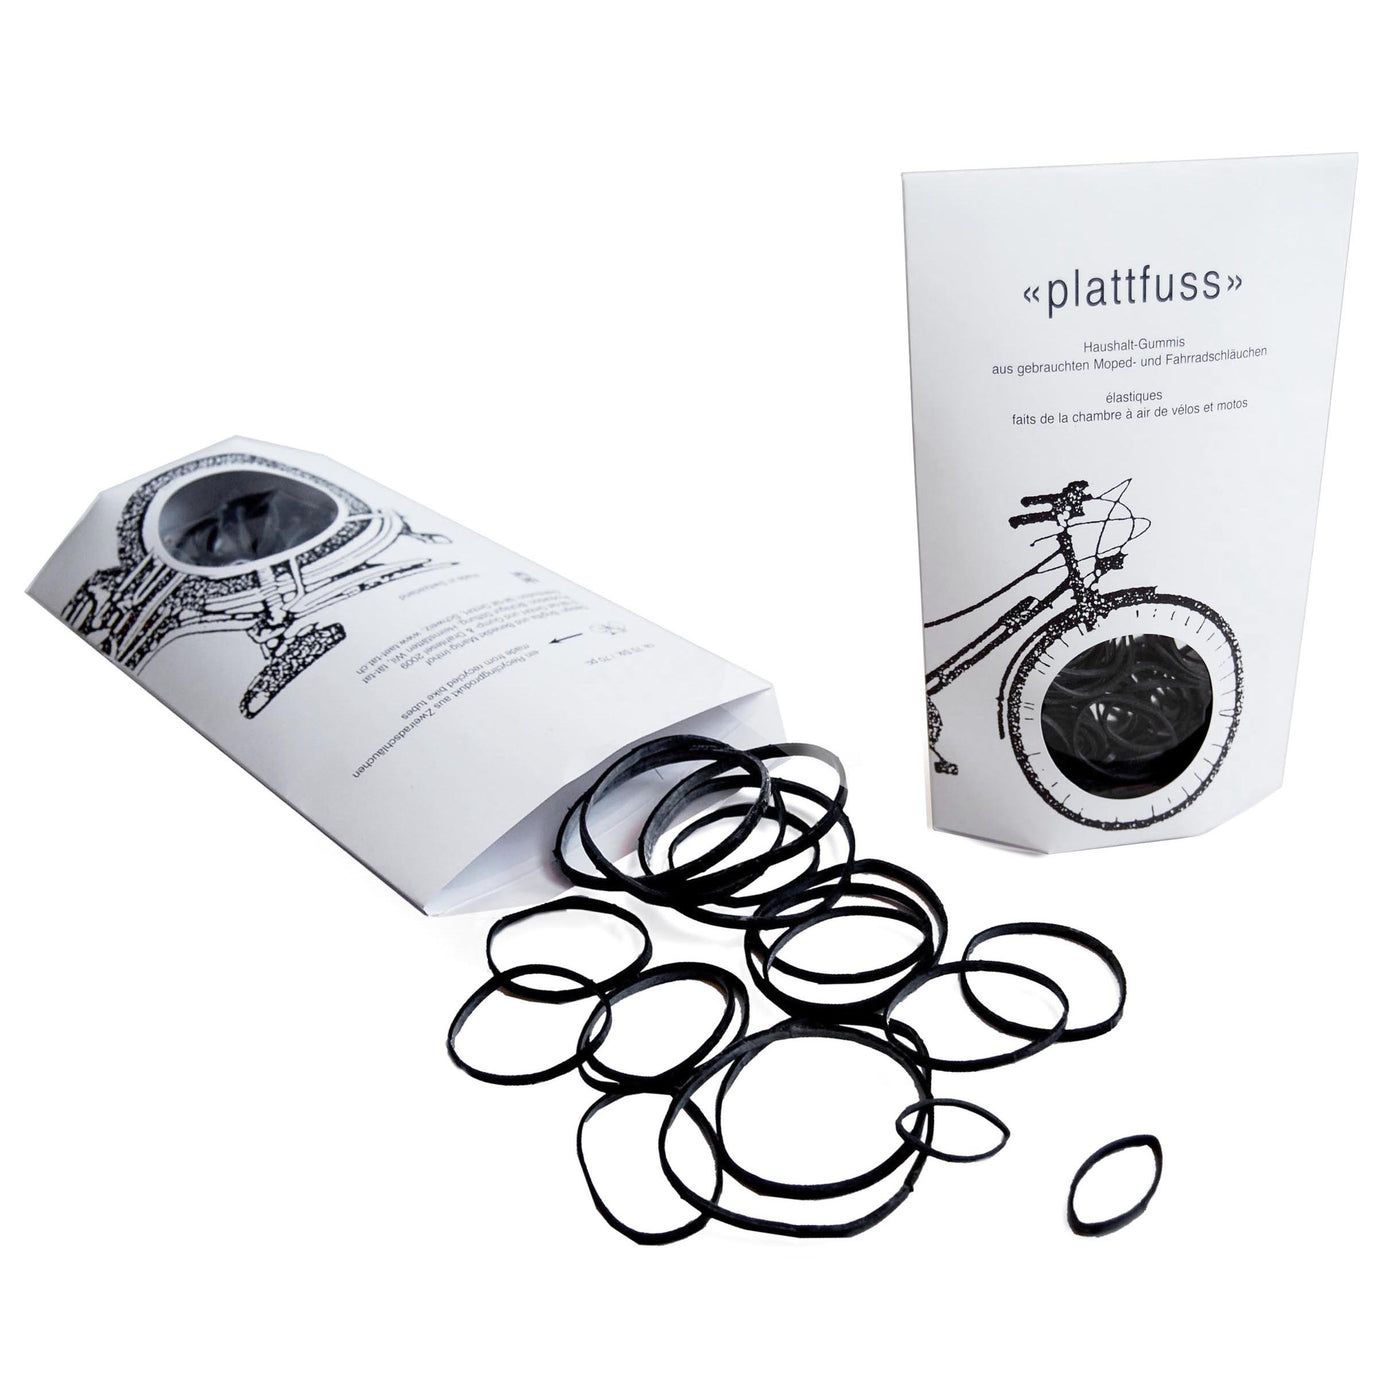 Bicycle Tube Plattfuss Rubber Bands